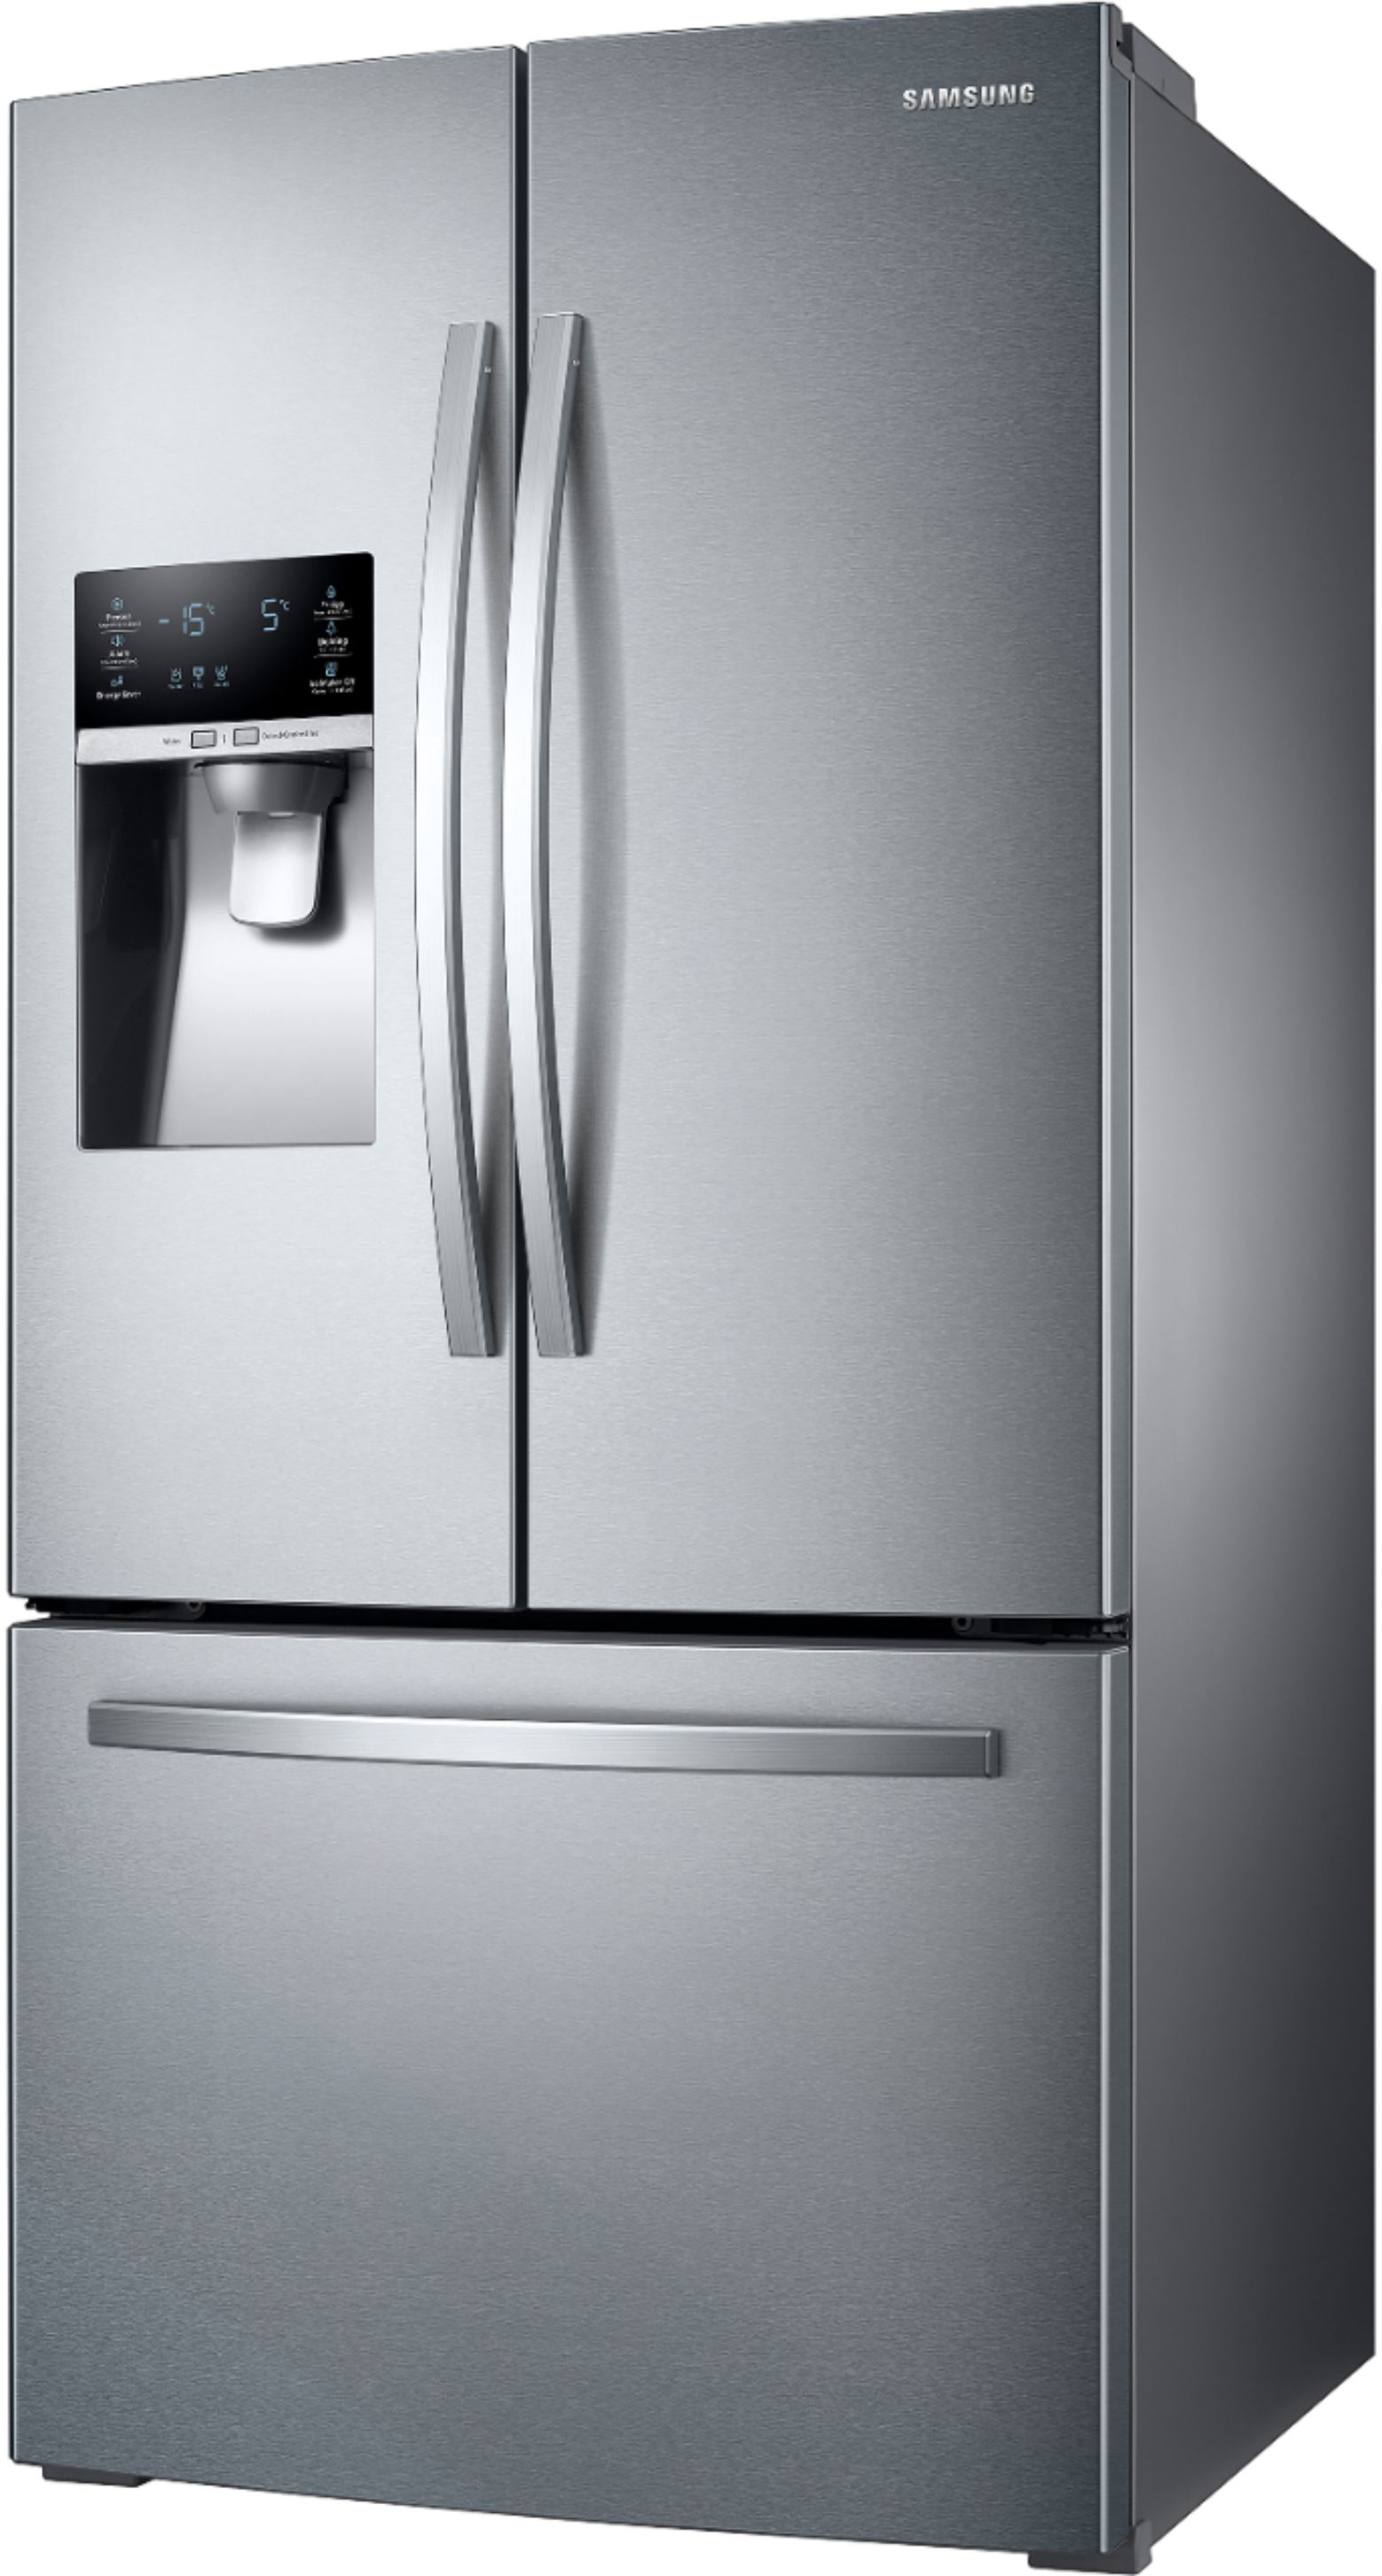 Questions and Answers: Samsung 26 cu. ft. 3-Door French Door ...